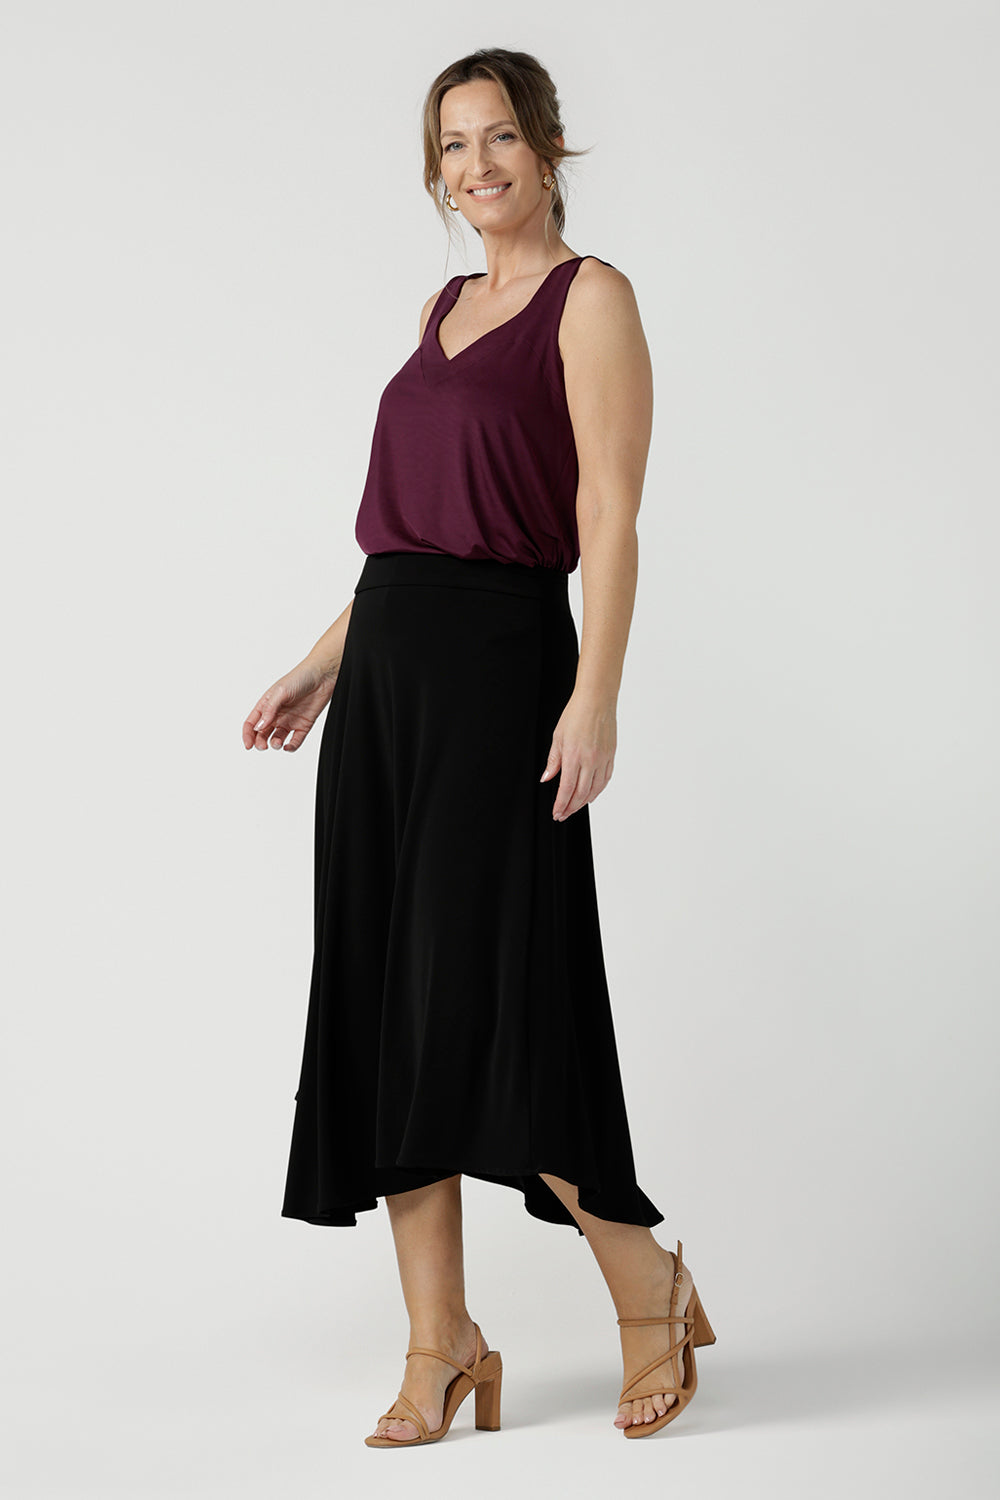 A size 10  woman wears an asymmetric skirt in black jersey. Worn with a plum red cami top, this comfortable jersey skirt works for work wear, casual wear and eveningwear. Made in Australia by women's clothing brand, Leina & Fleur in petite, mid size and plus sizes. 